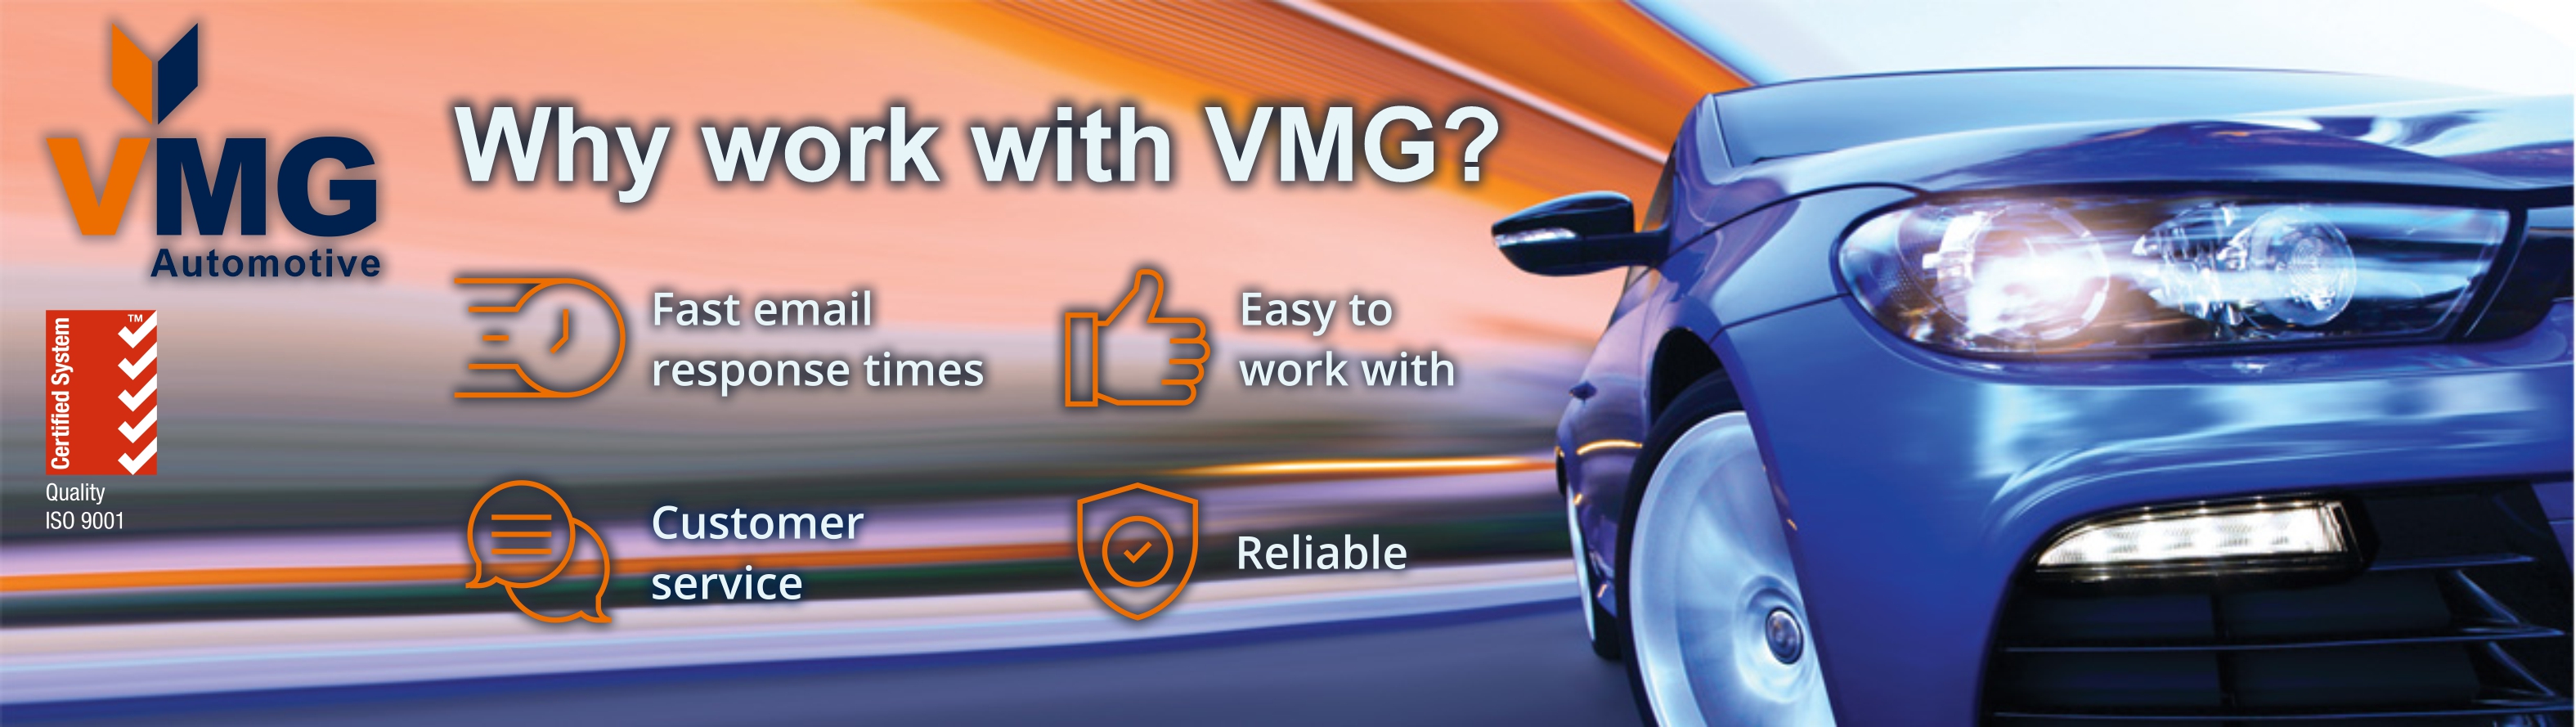 Why Work With VMG